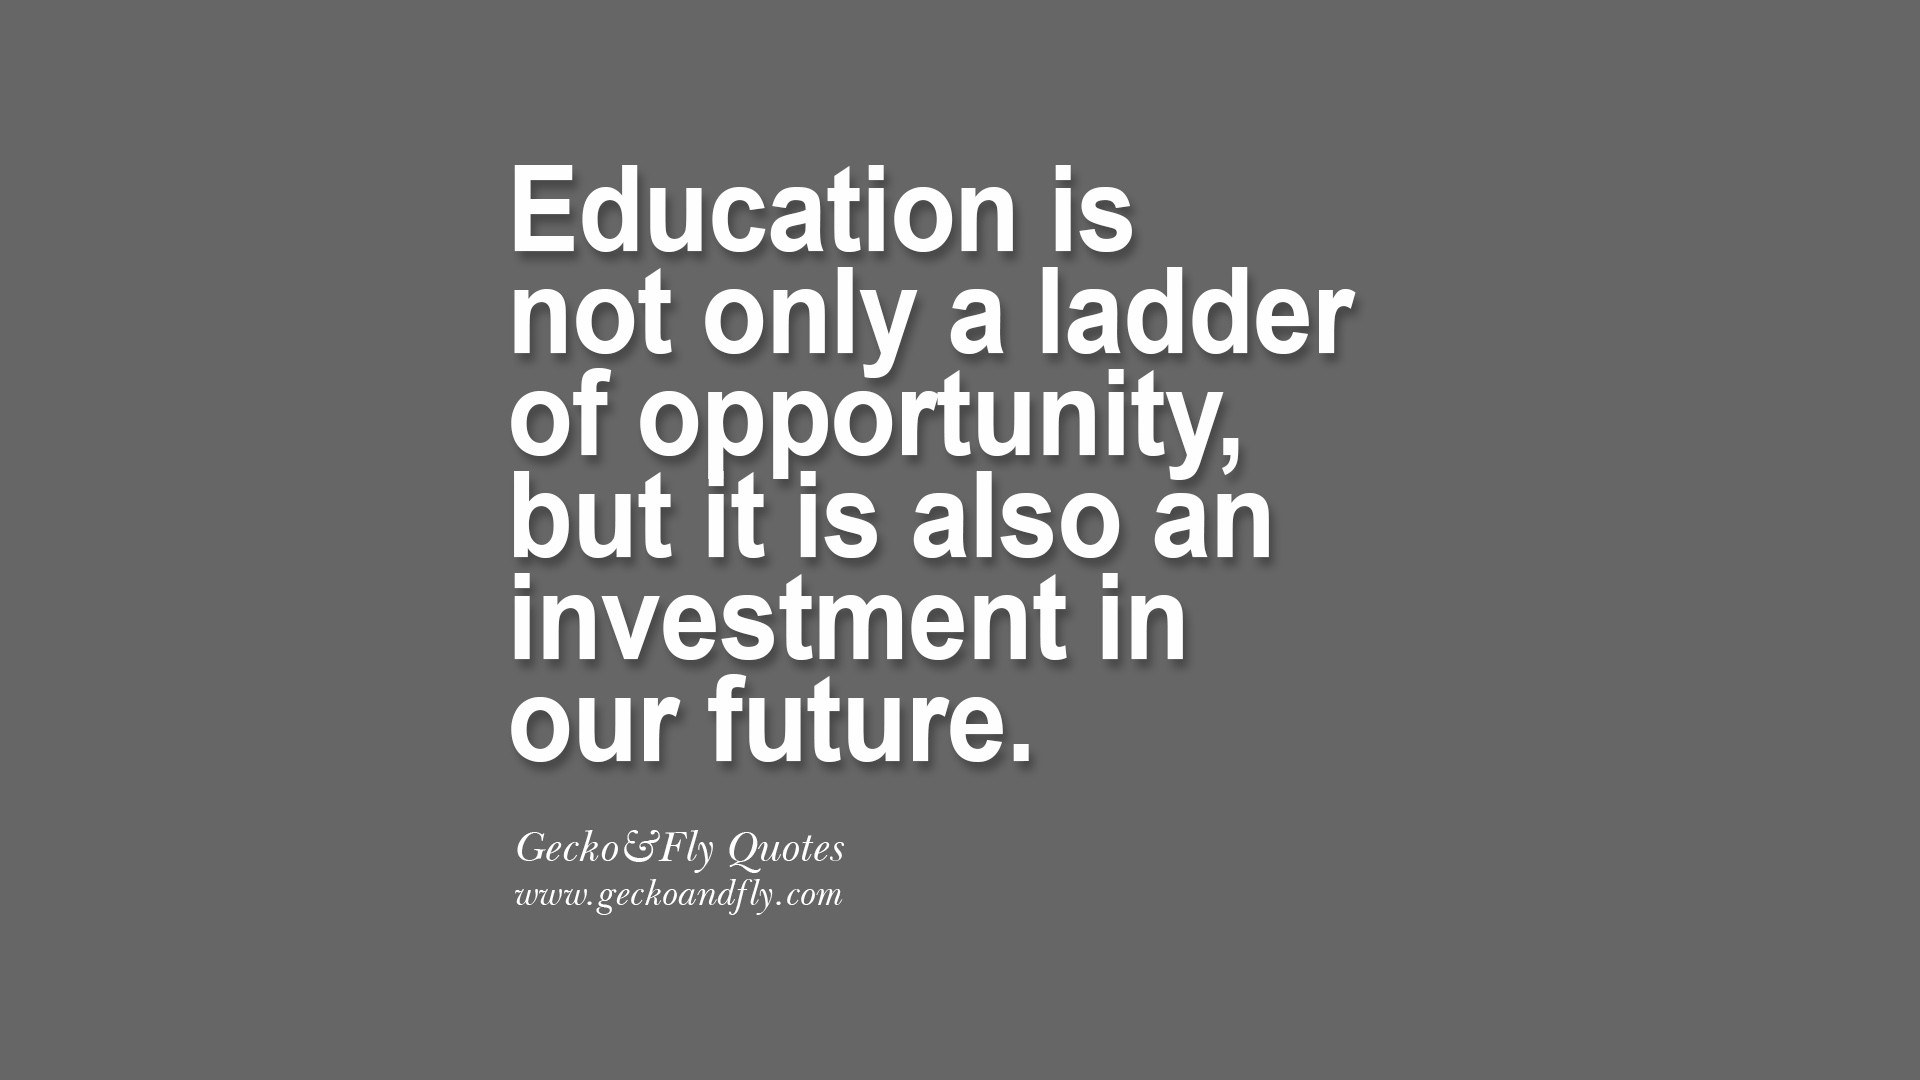 Quotes About Importance Of Education
 Importance Early Education Quotes QuotesGram